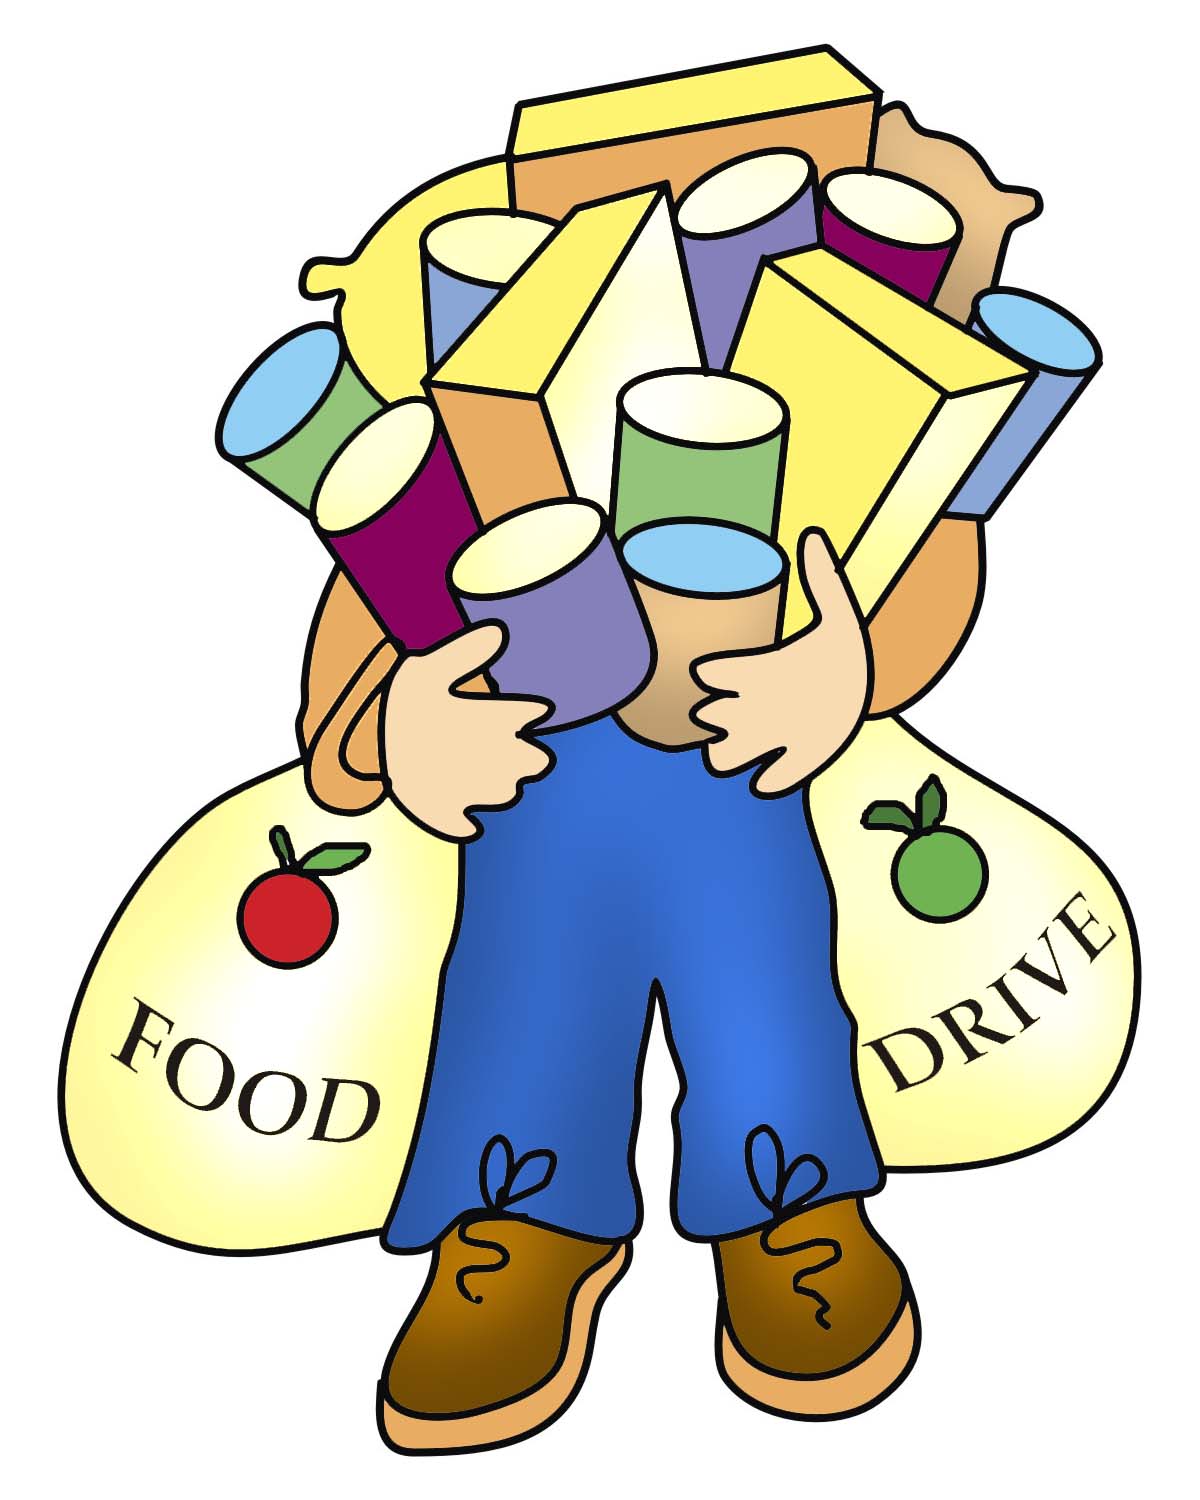 Food Drive Poster Ideas   Clipart Panda   Free Clipart Images